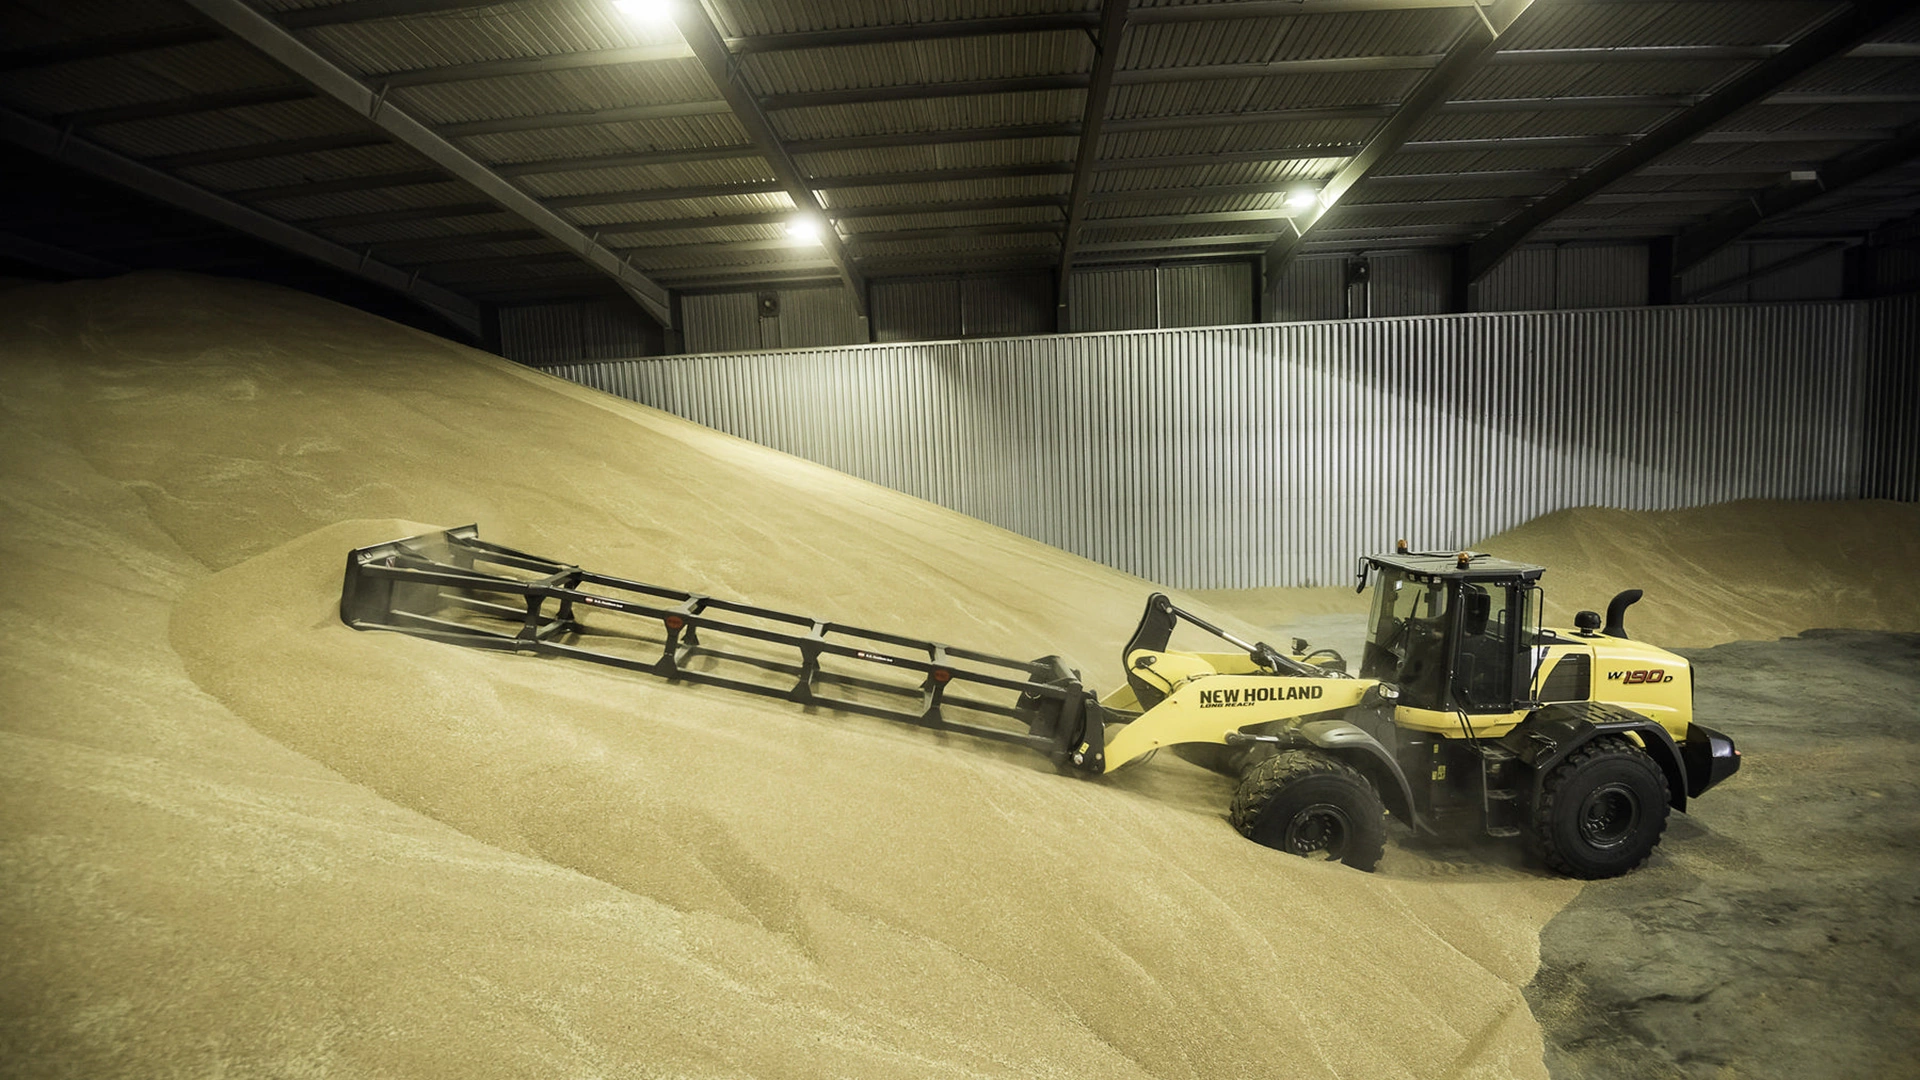 New Holland W190D wheel loader at work efficiently moving a large quantity of grain within an agricultural storage facility.